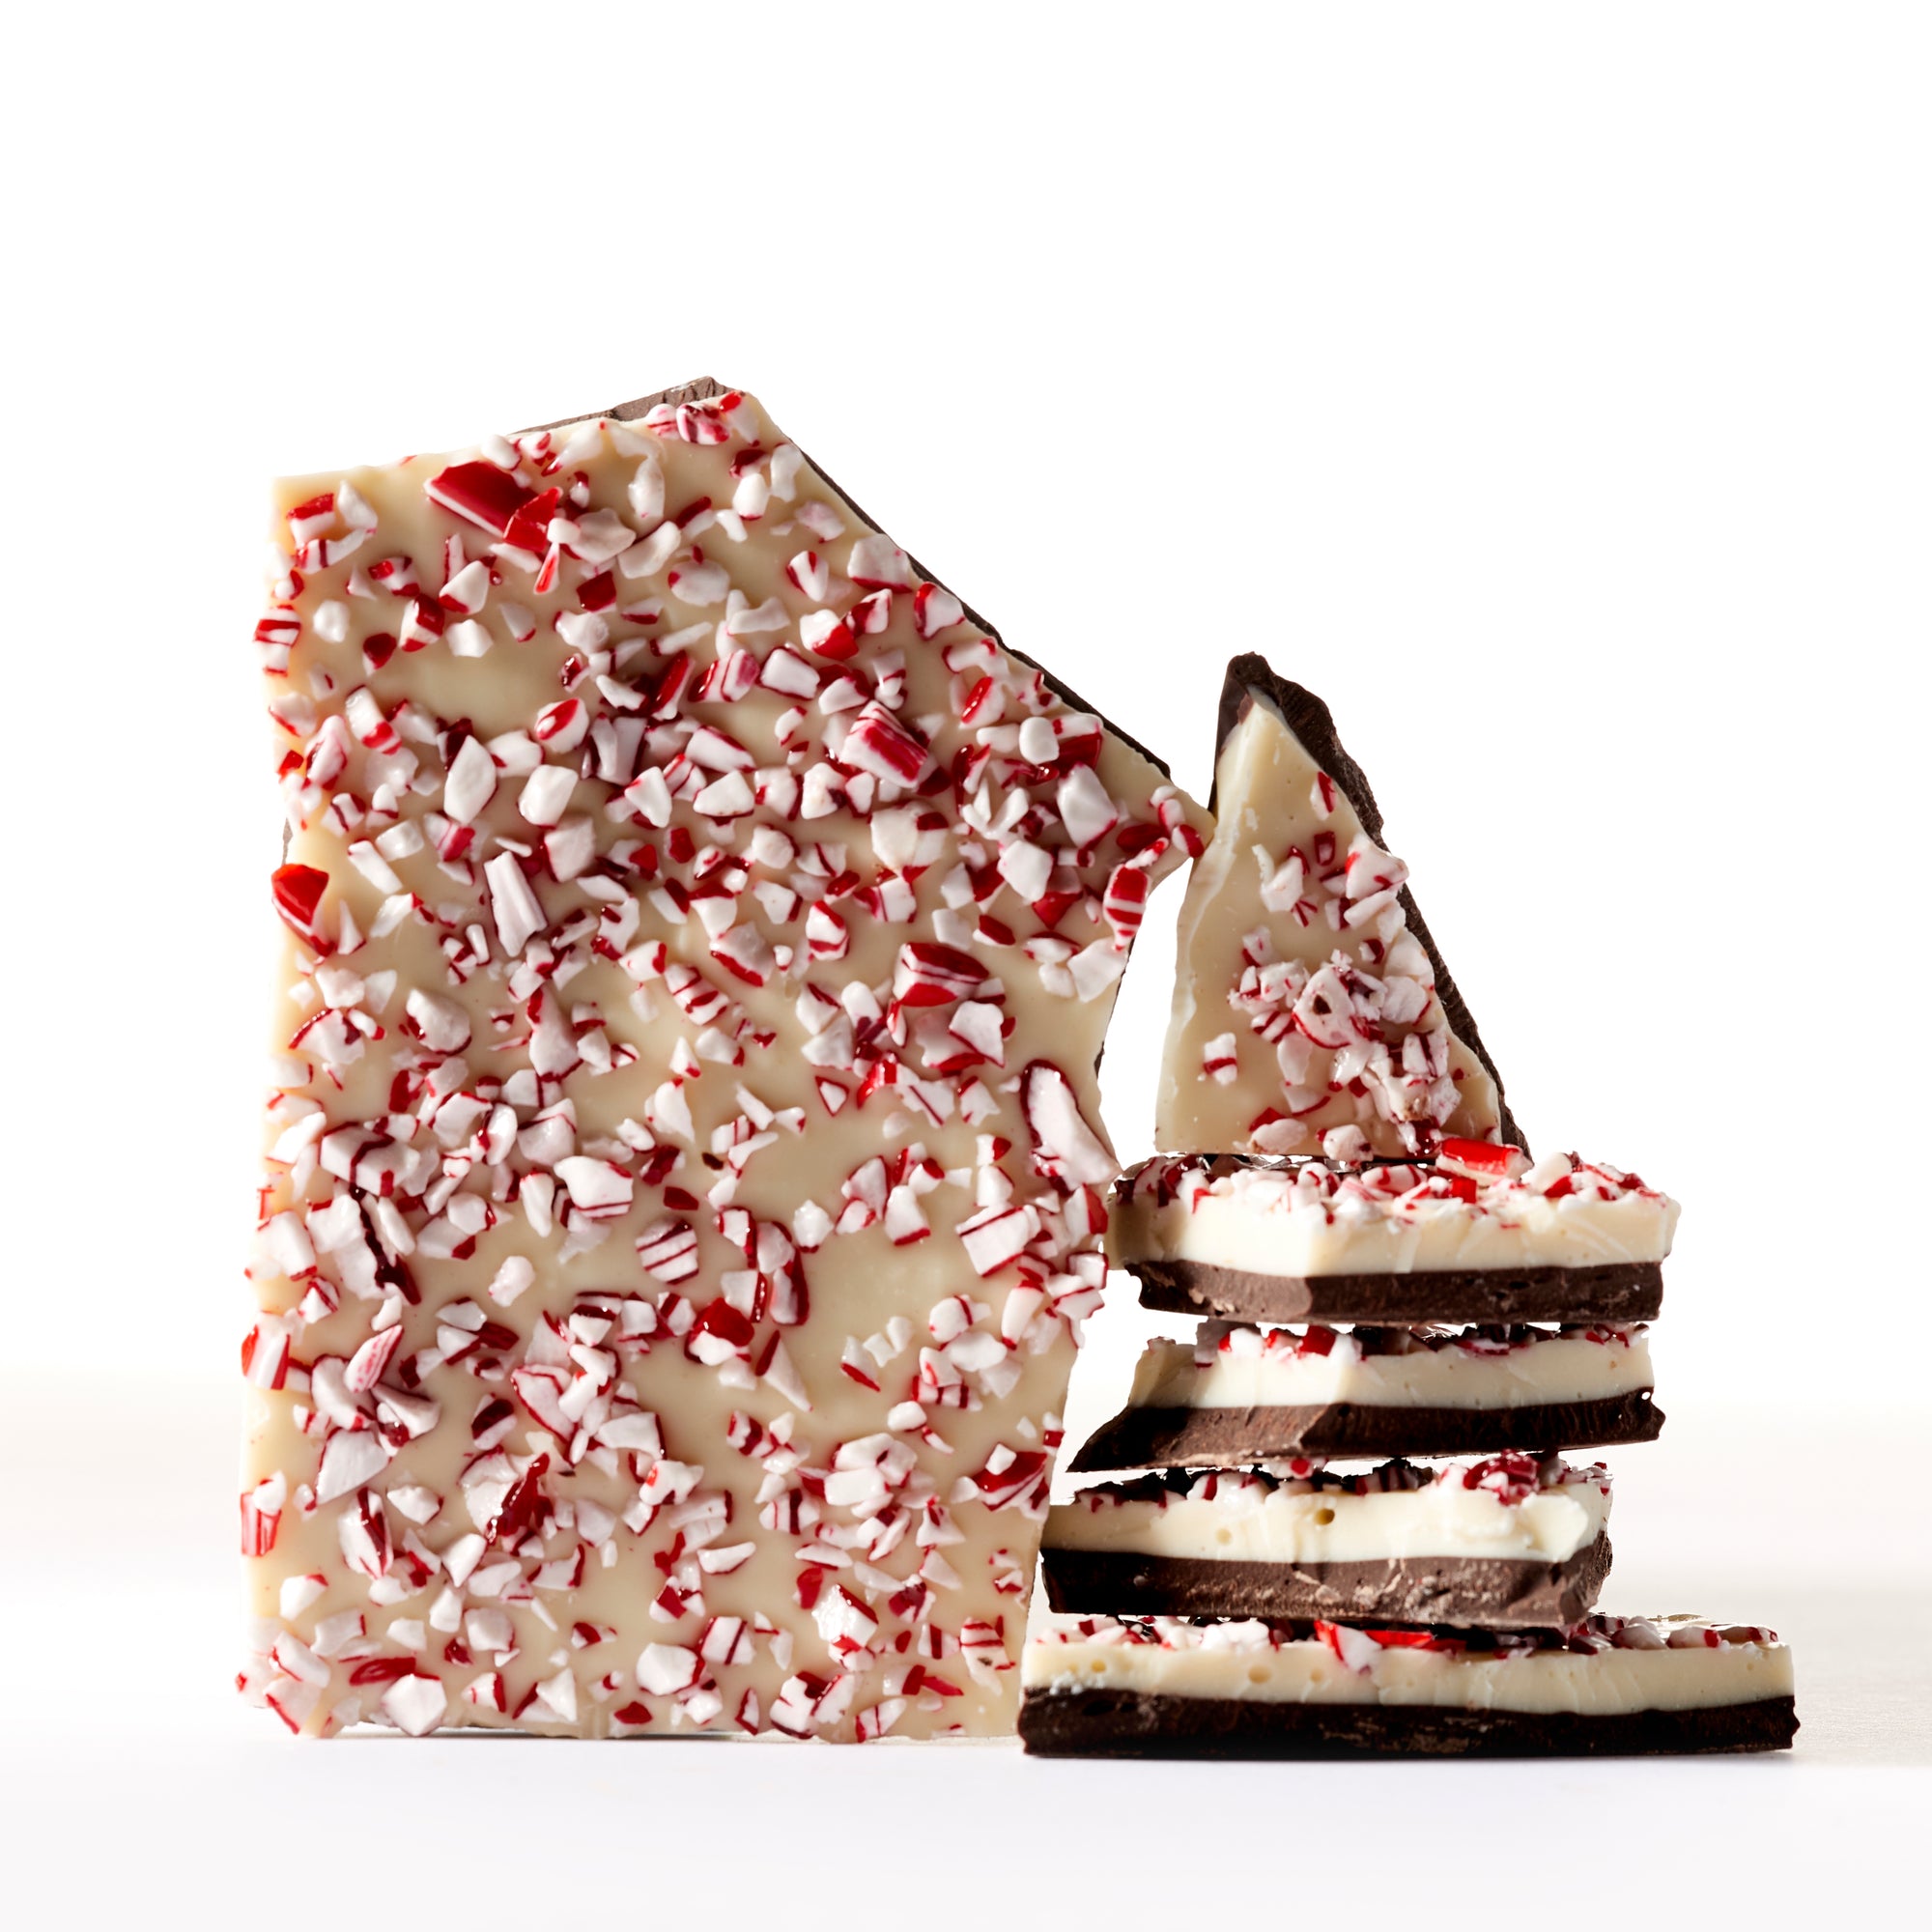 Assorted Dark & White Chocolate Bark Wooden Table Baking Co.